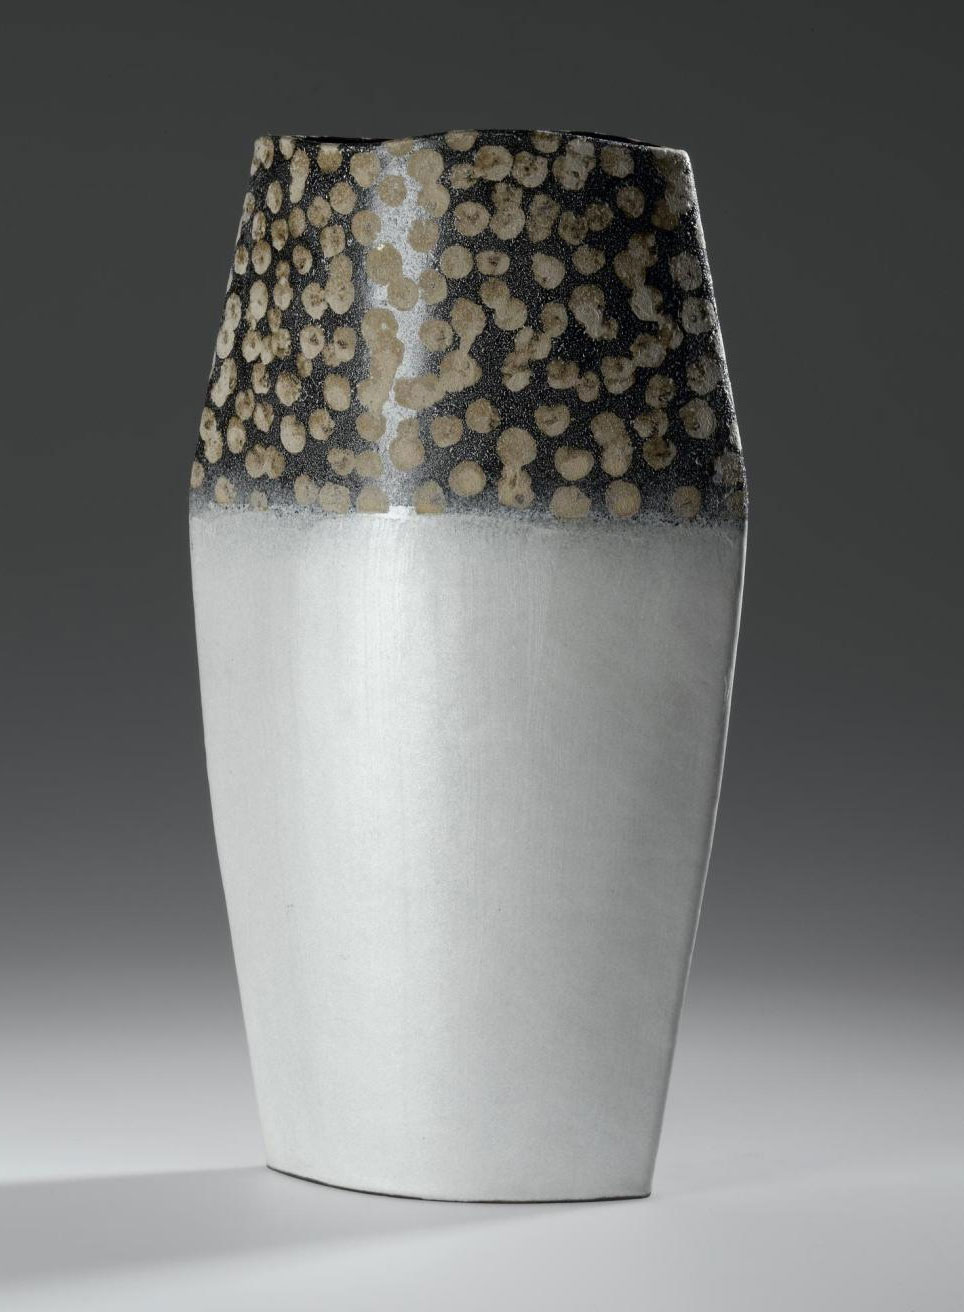 Vase of copper with precious metal clay and mica on exterior, interior lined with enamel: Japan, signed by Iwata Hiroki, 2004. © Hiroki Iwata.